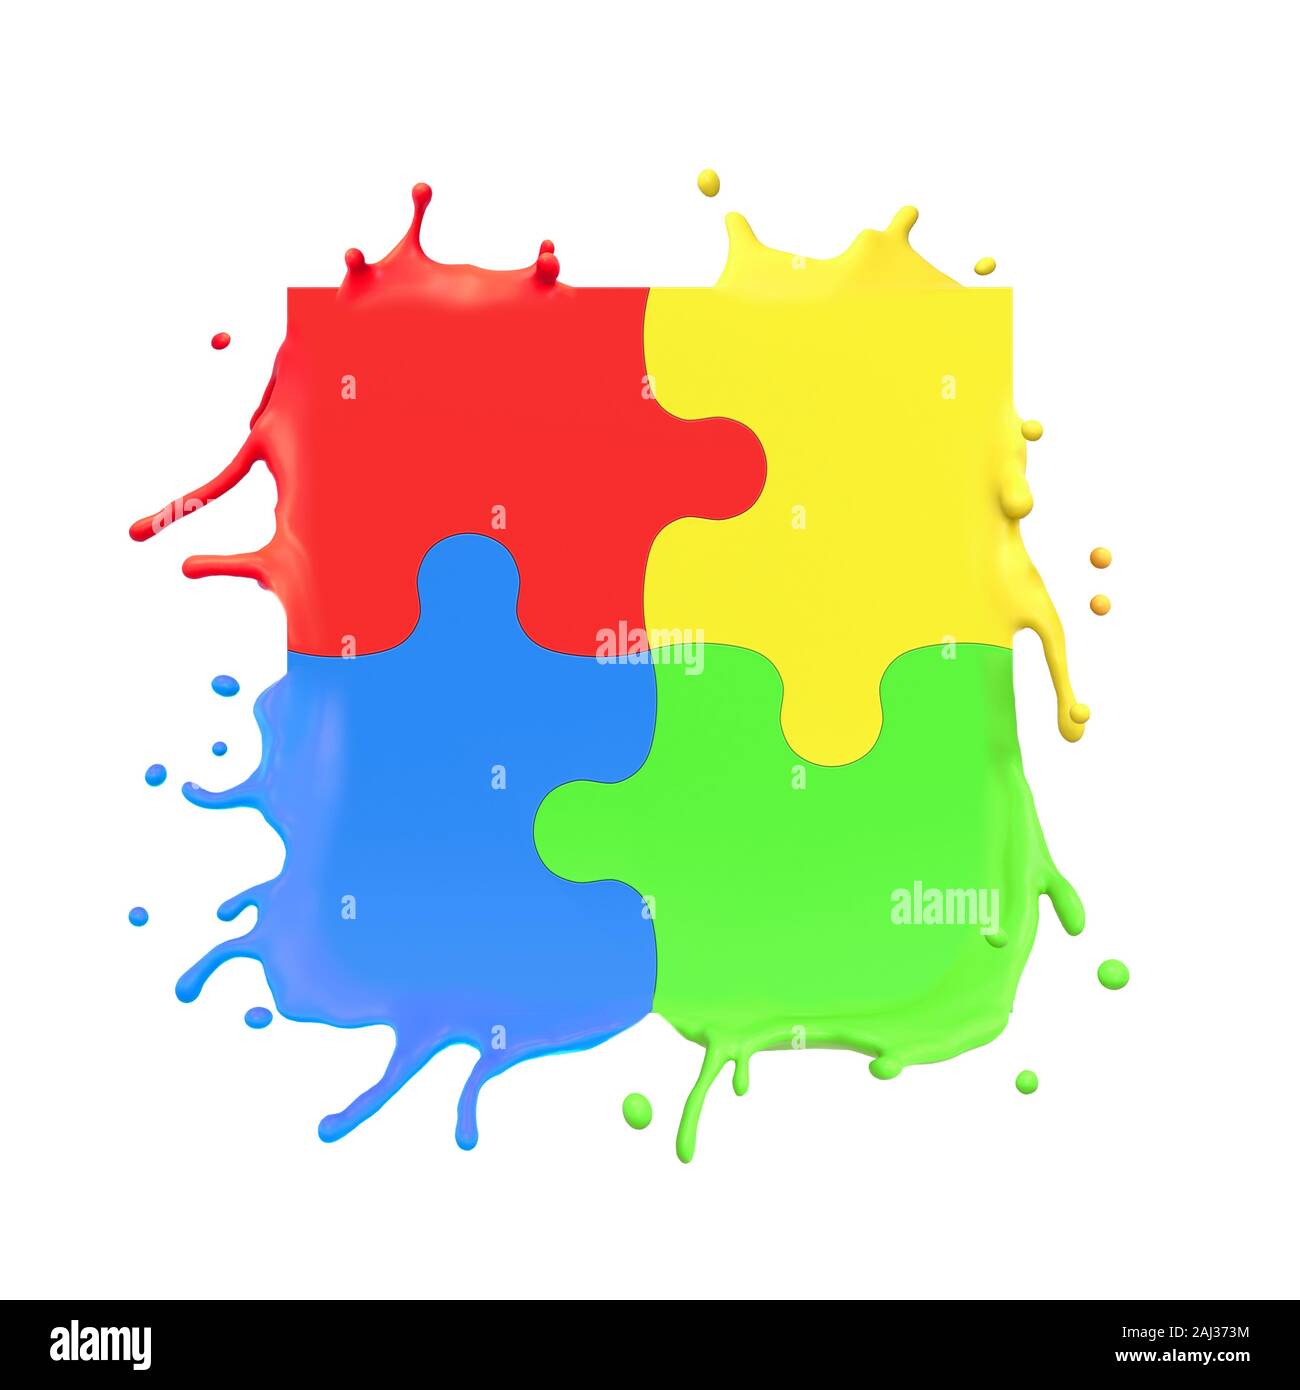 3d rendering of colorful puzzle pieces splashing isolated on white background. Digital art. Children playtime. Toys and games. Stock Photo